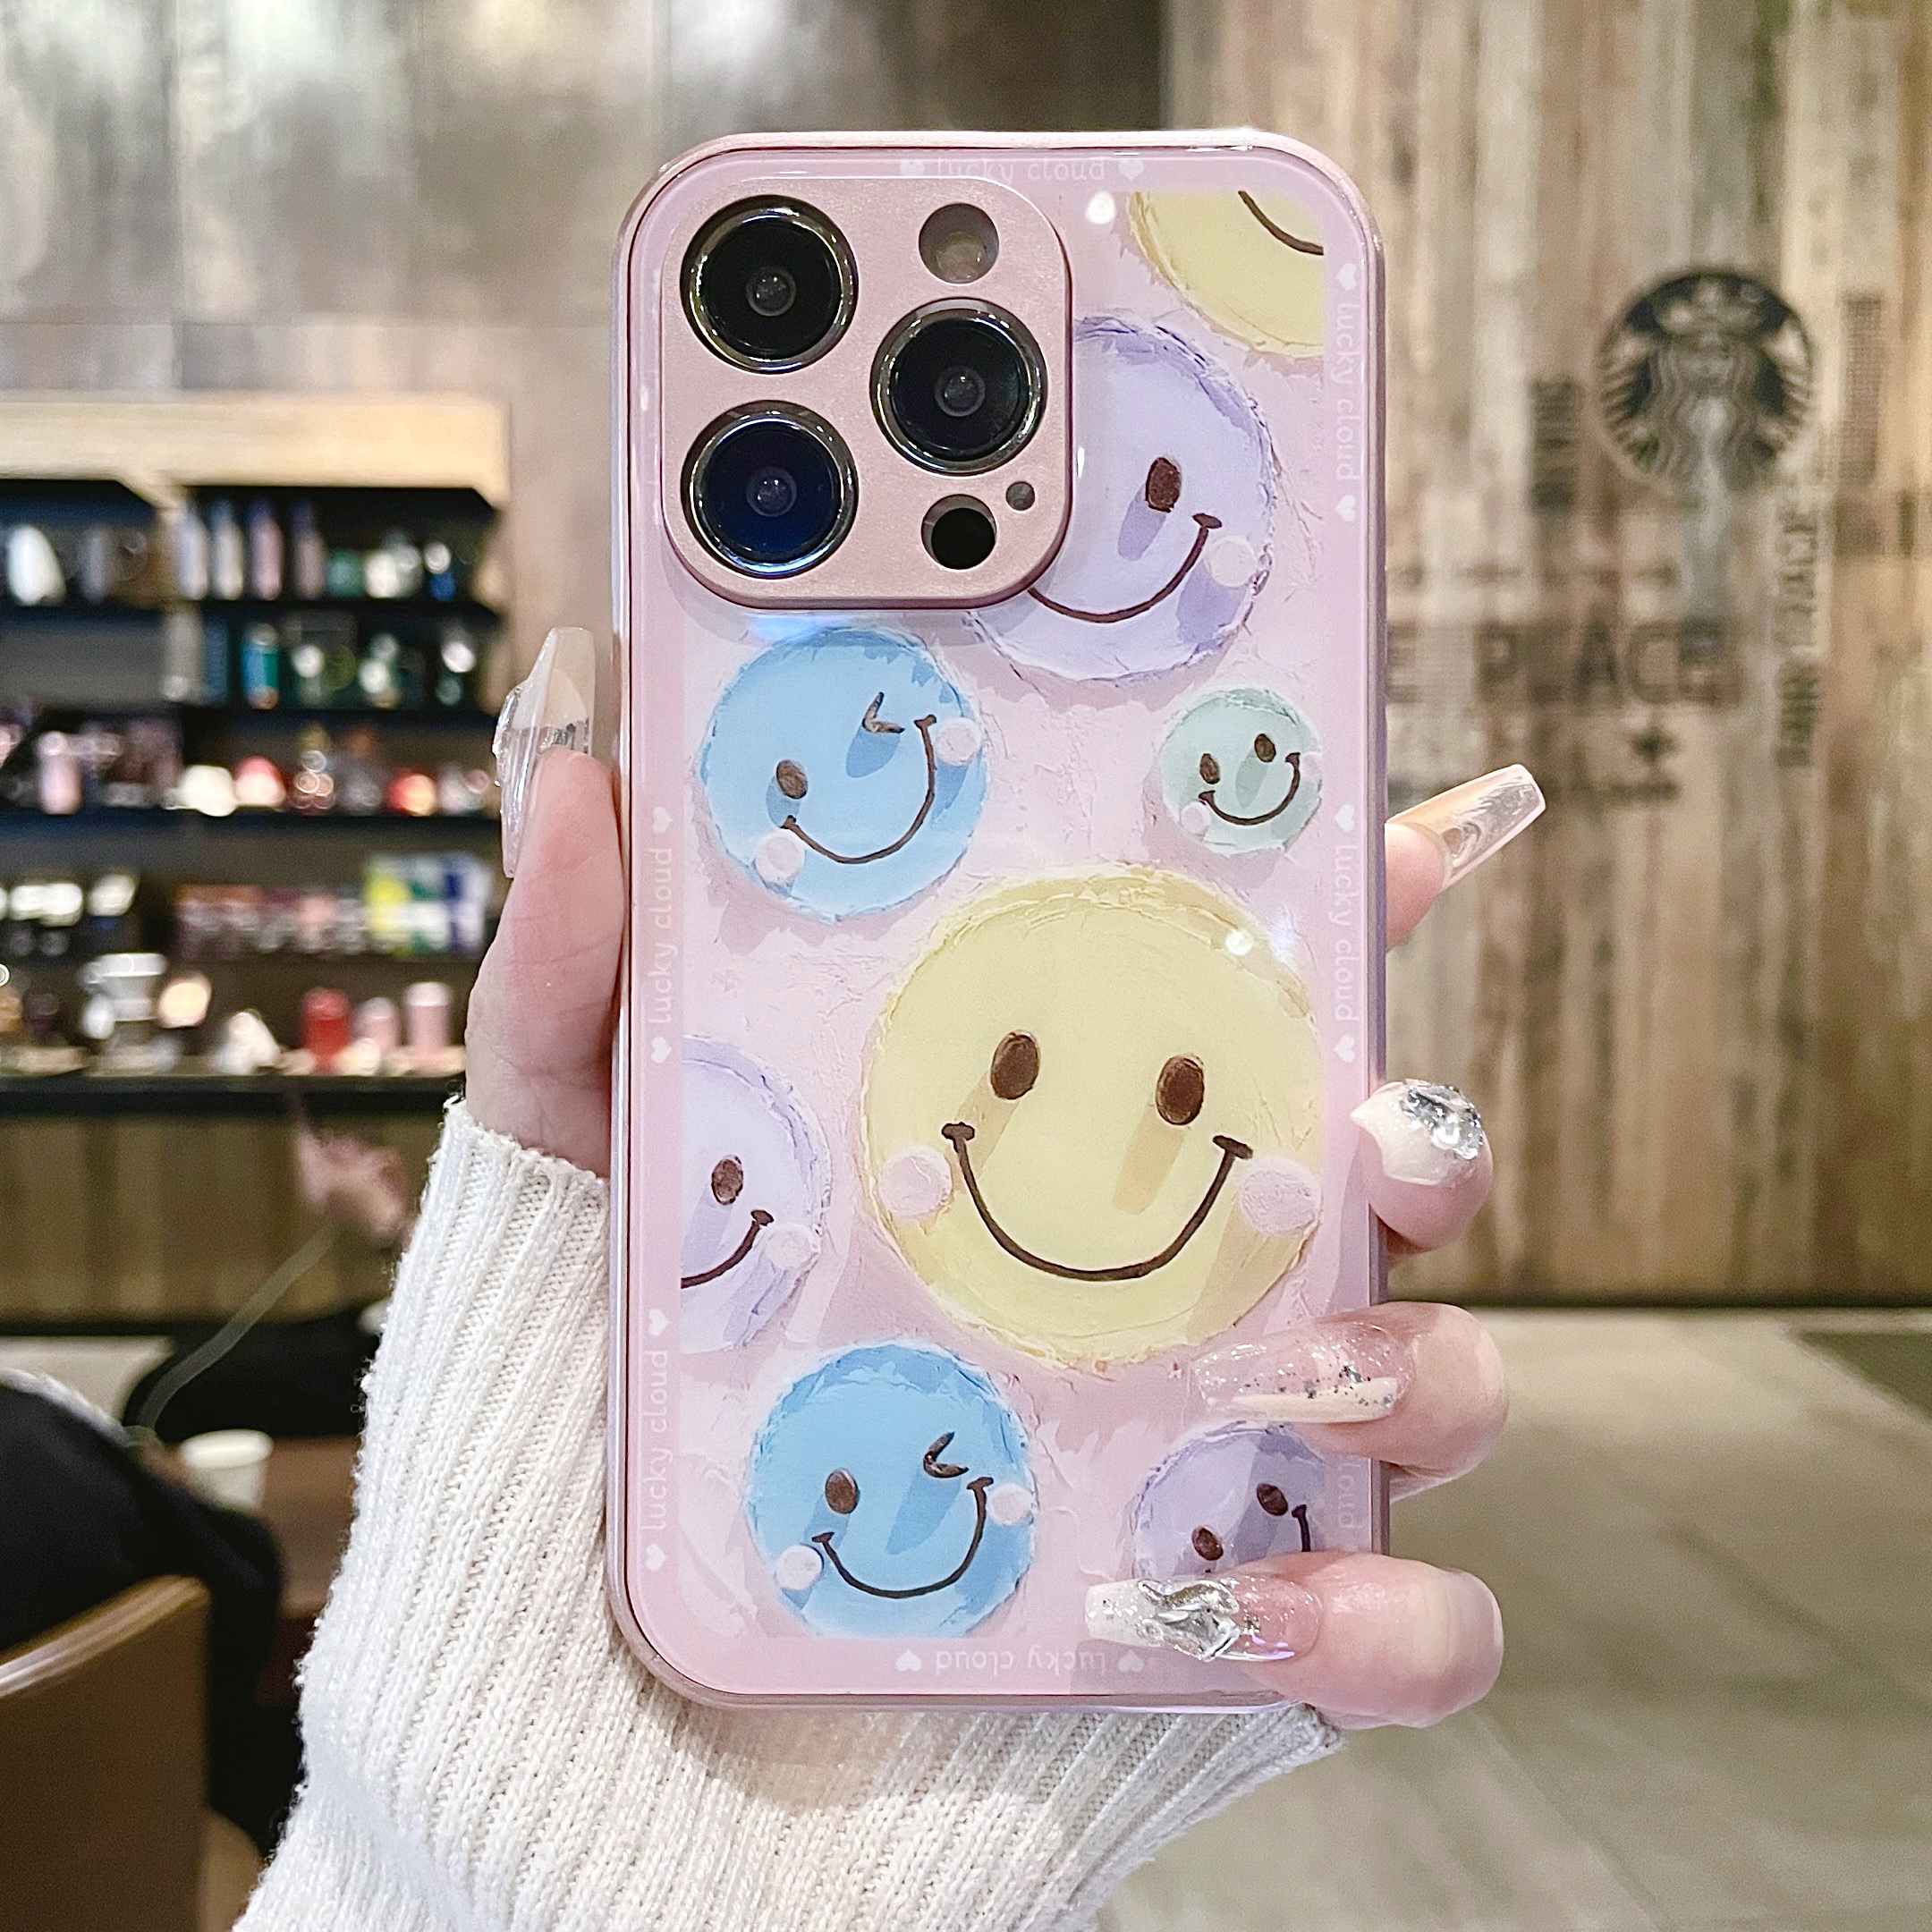 Smiley Face Pattern Glass Case Cover For iPhone